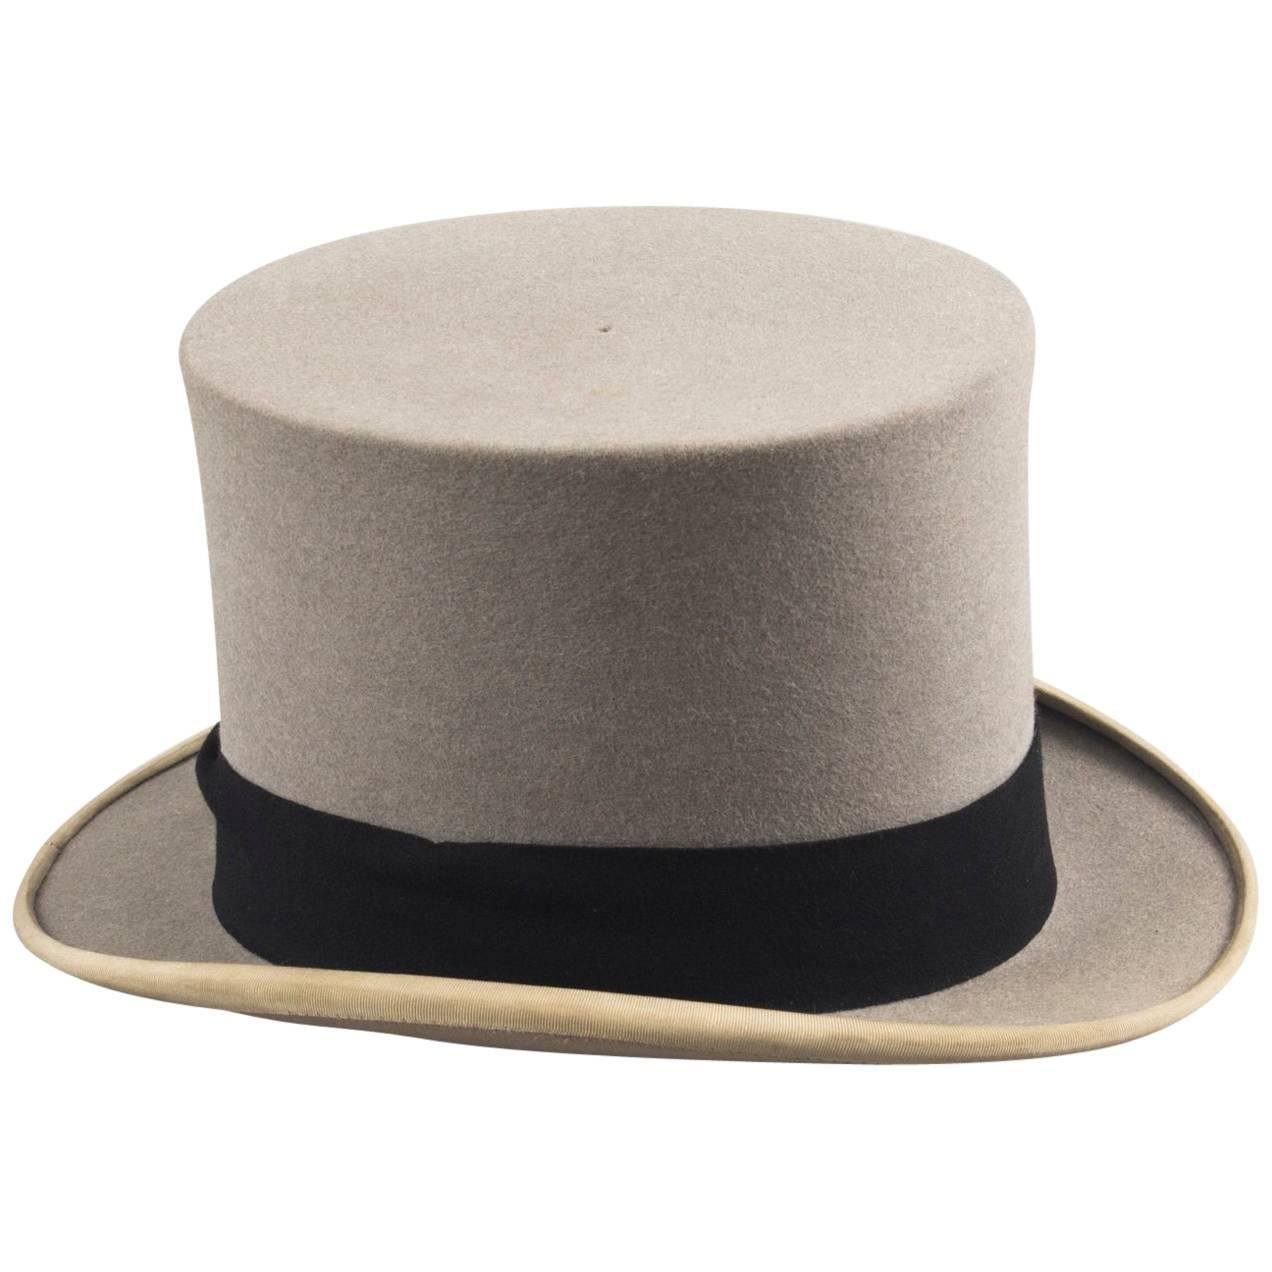 Antique Grey Felt Top Hat by Scott & Co, Early 20th Century Size 6 7/8